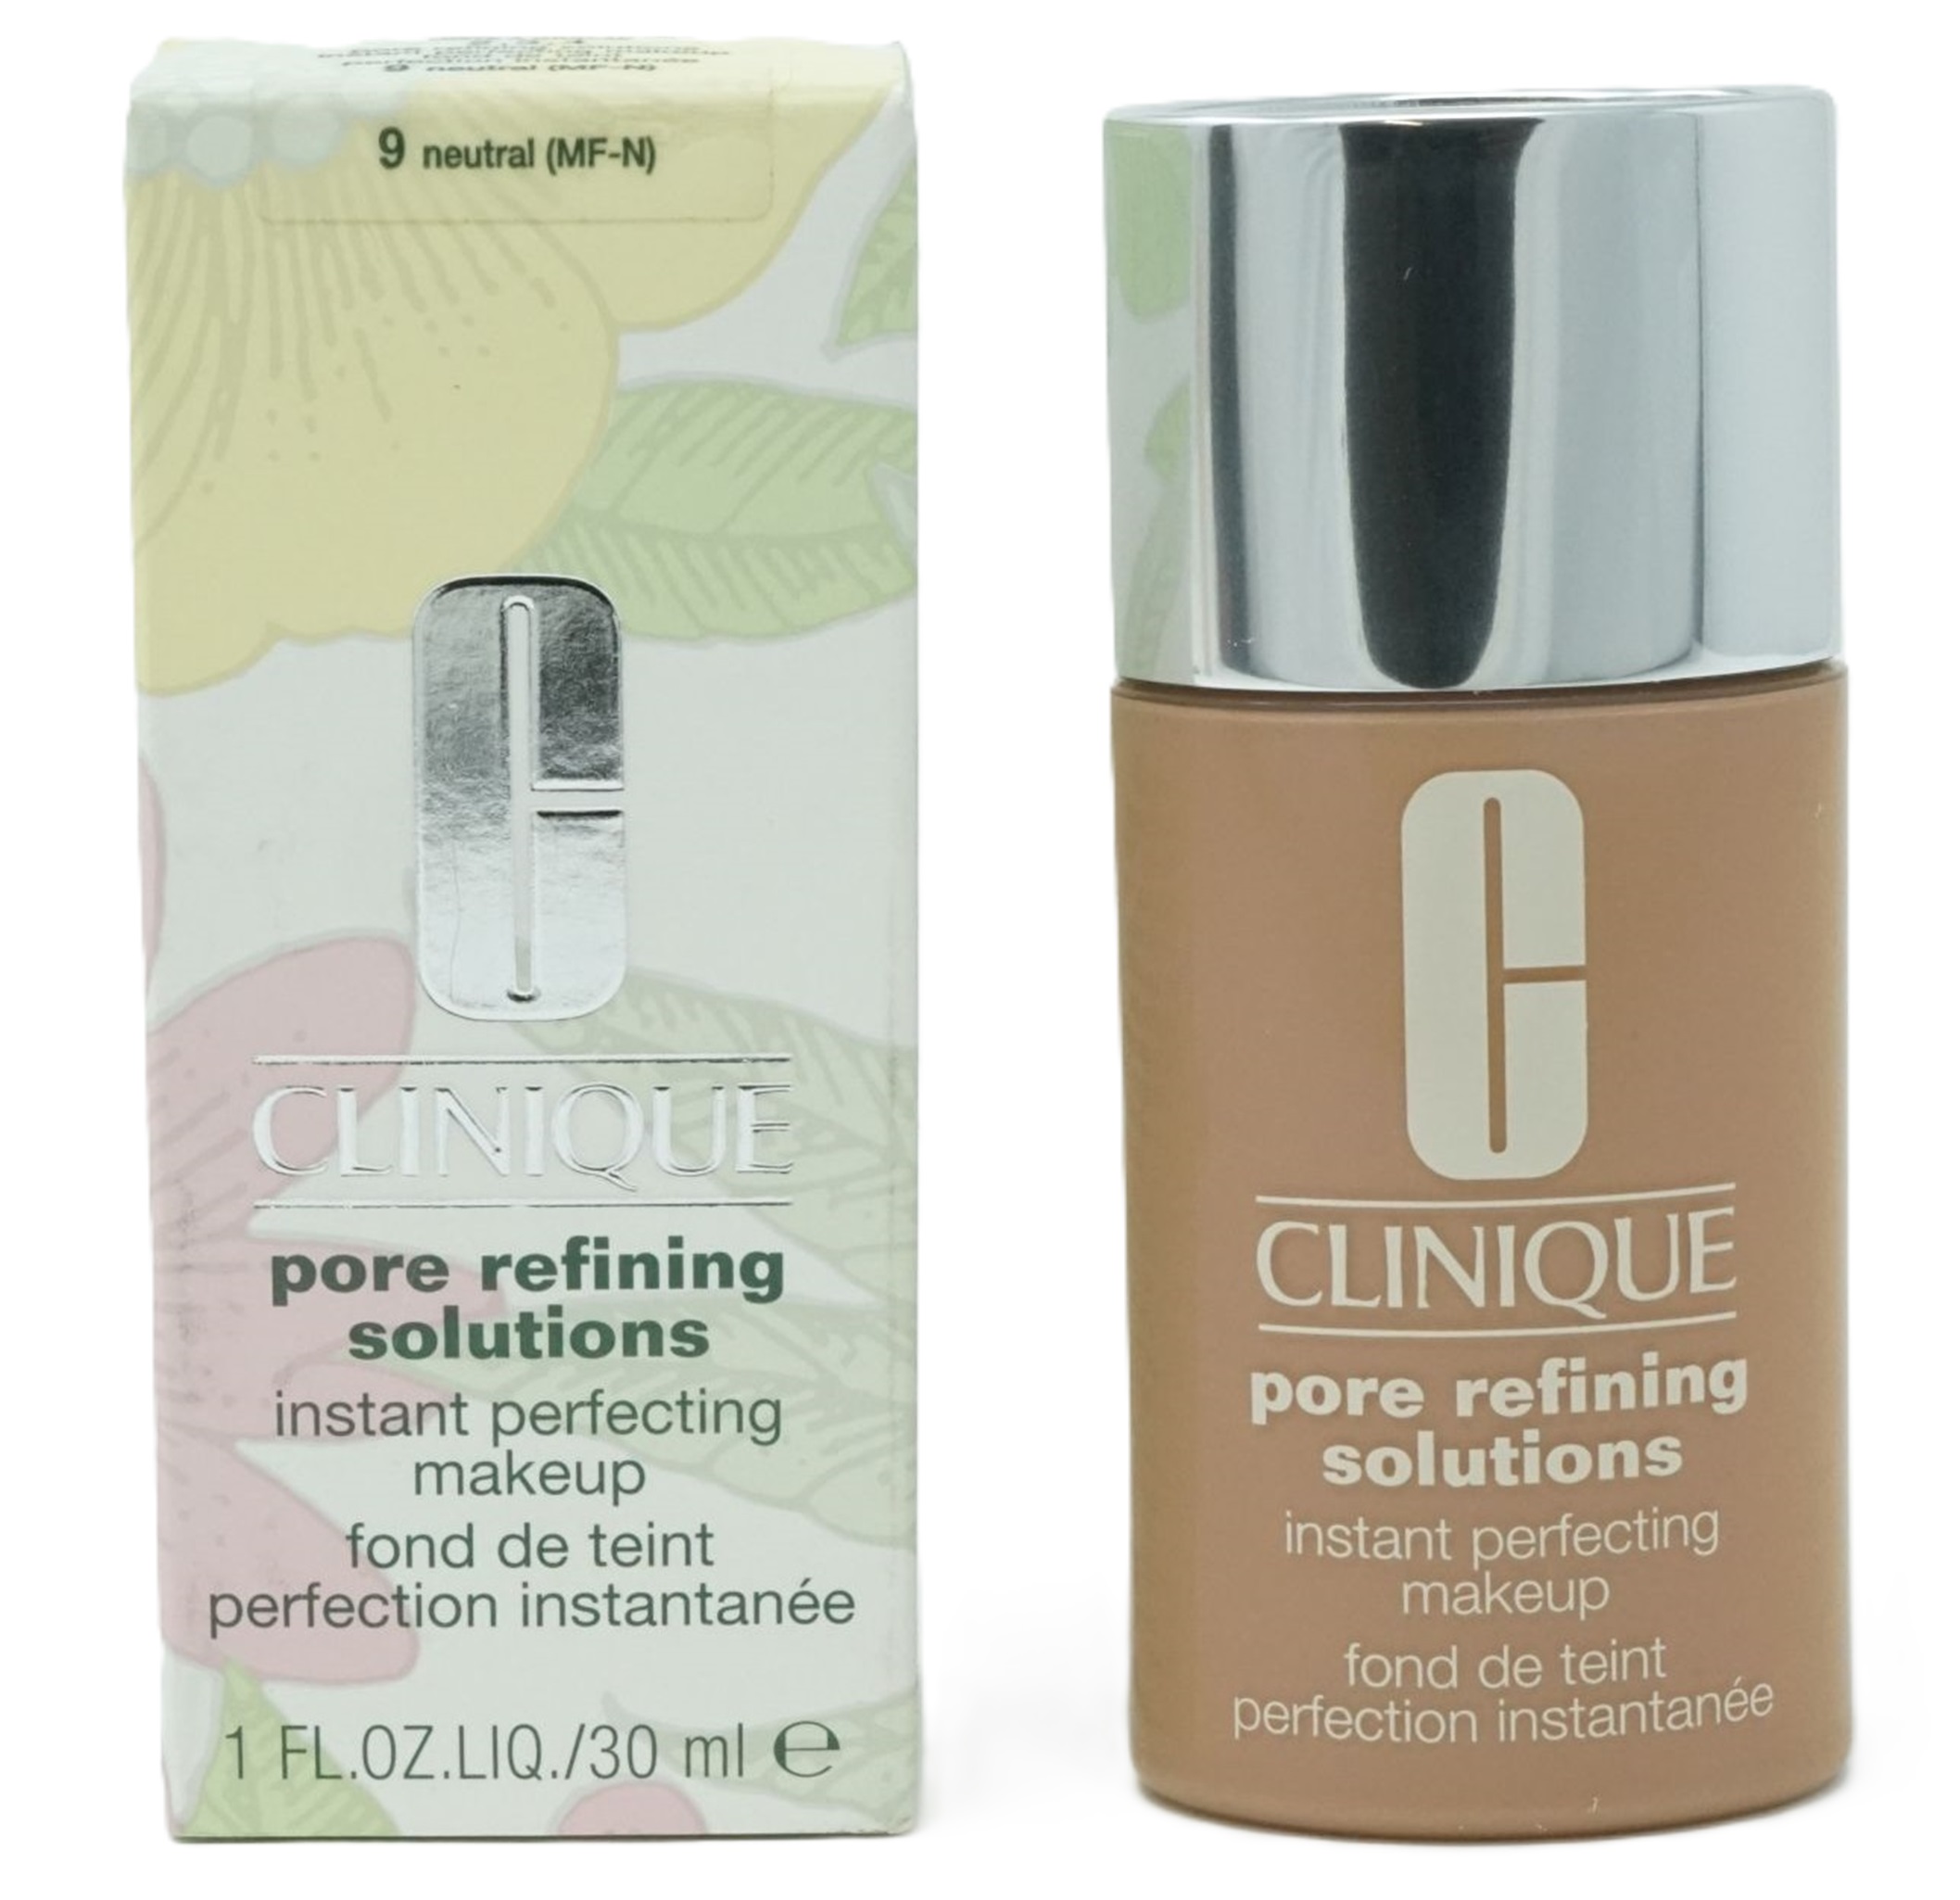 Clinique Pore refining solutions perfecting Makeup 30 ml   19 sand (M-N)